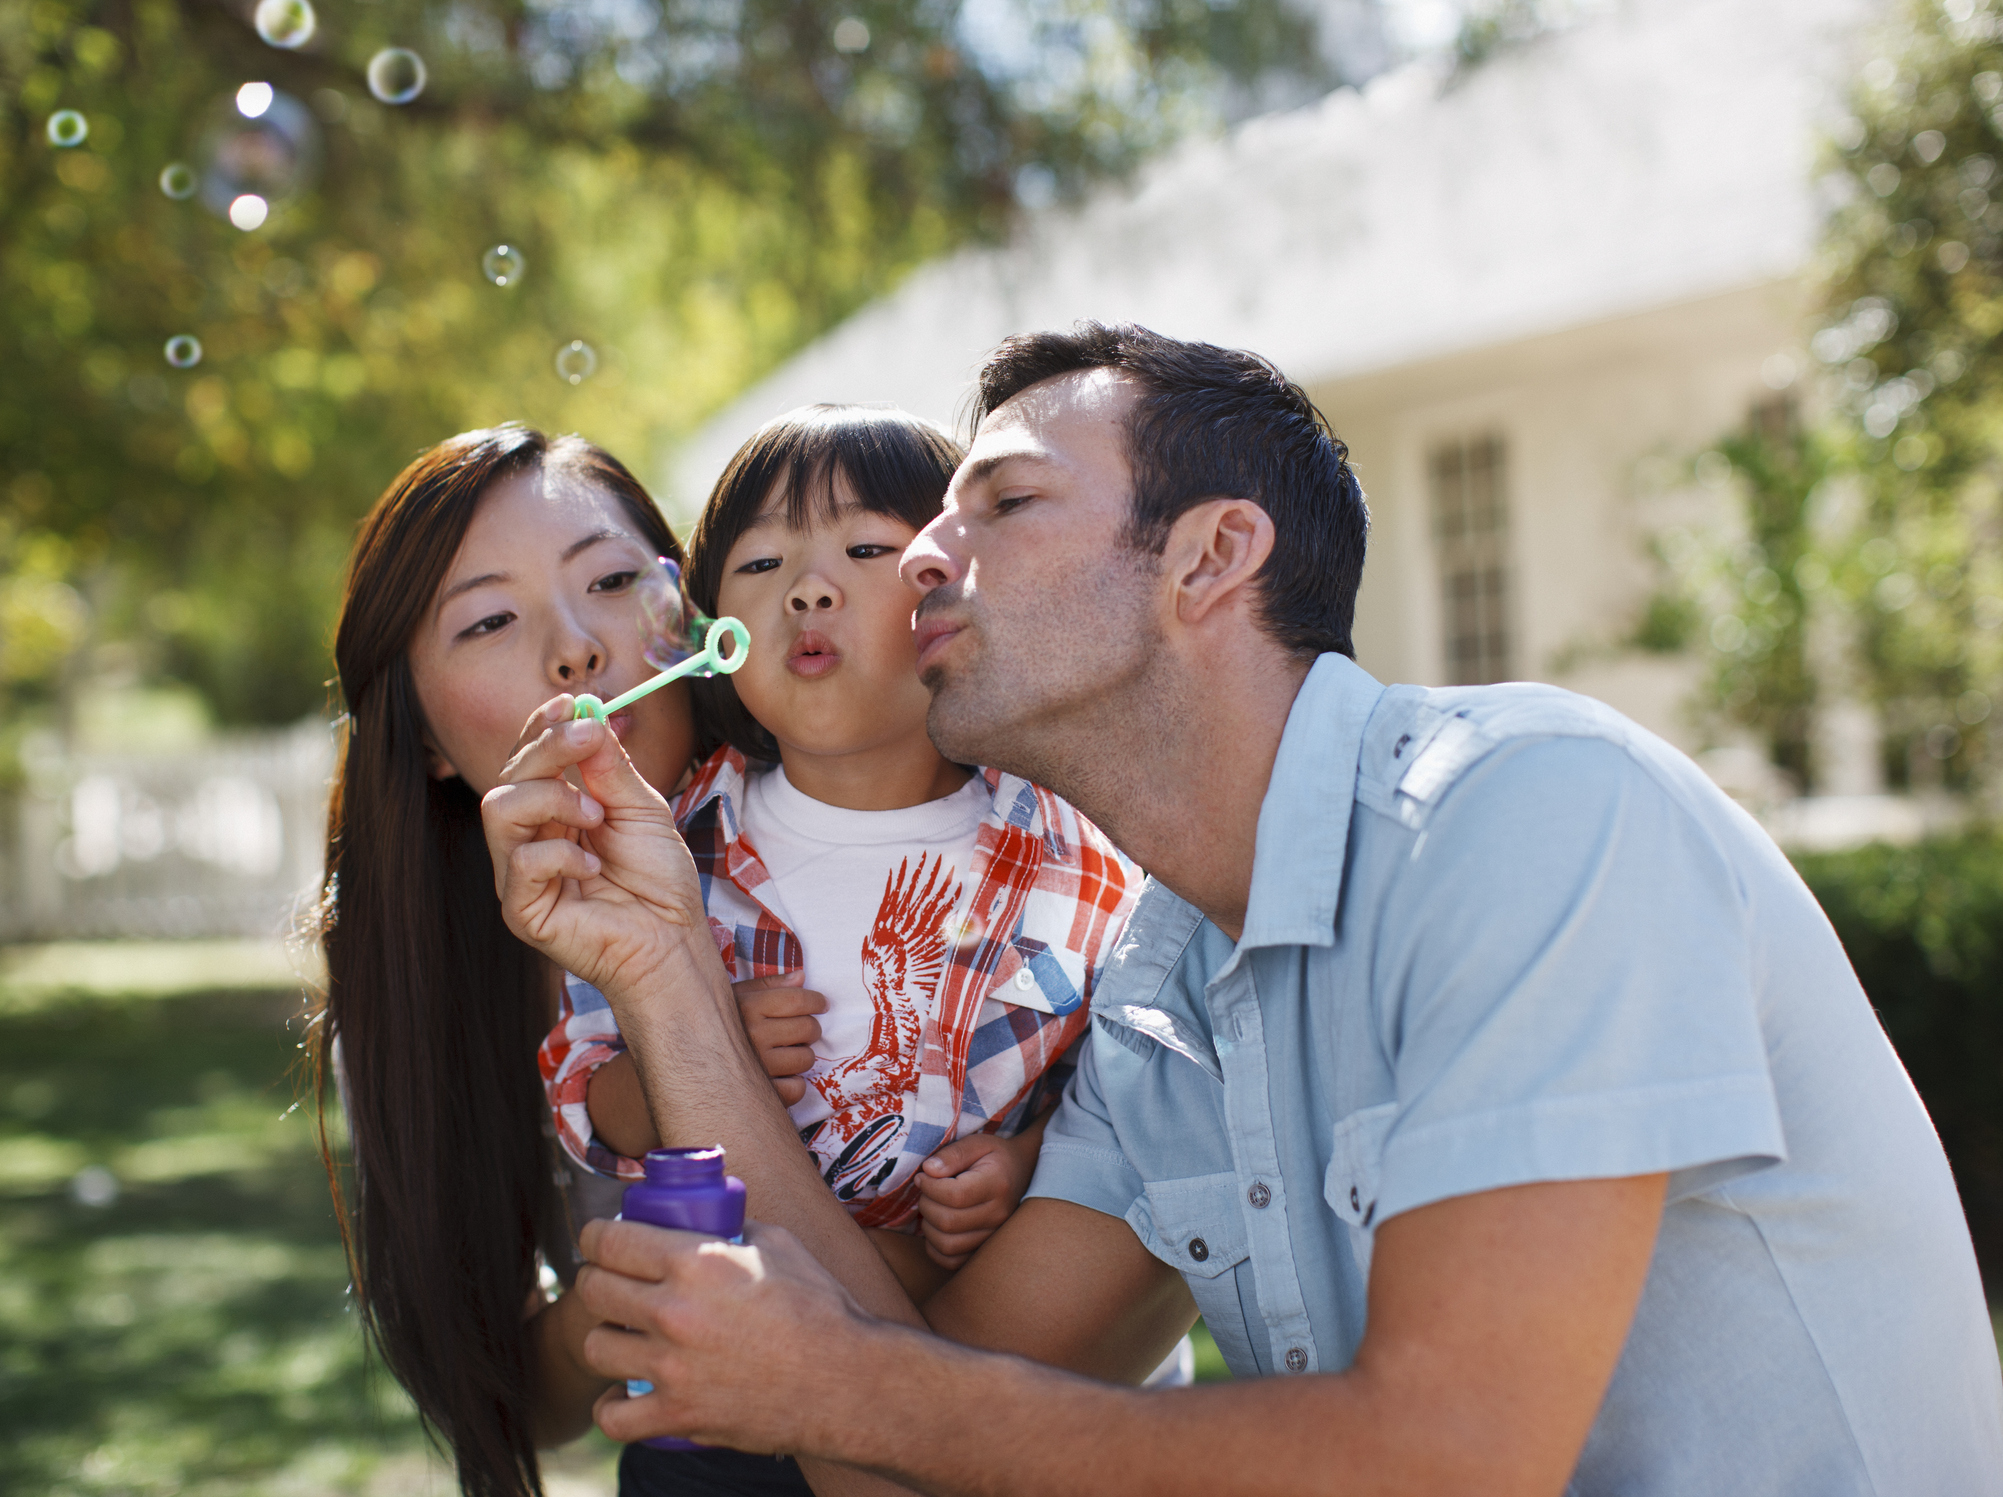 A young family blowing bubbles